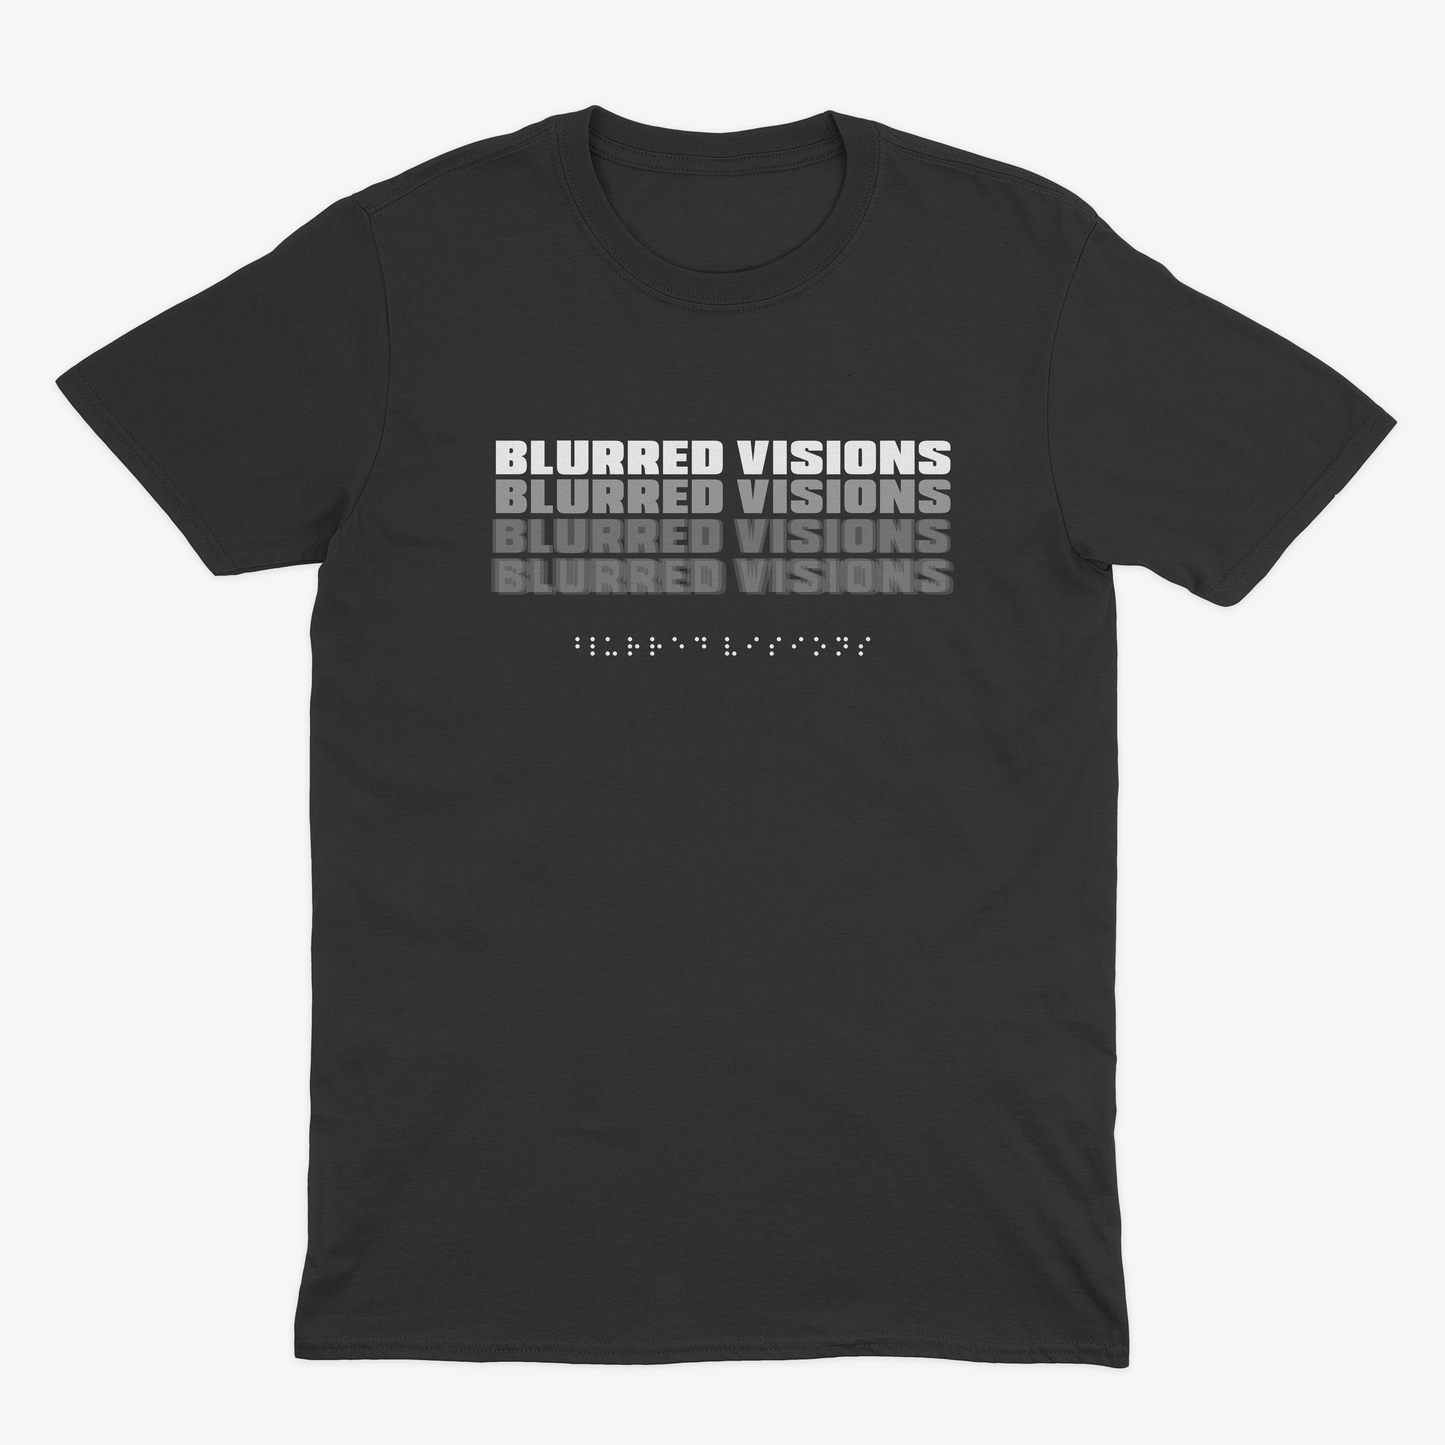 Blurred Visions - Limited Edition Adult Tee